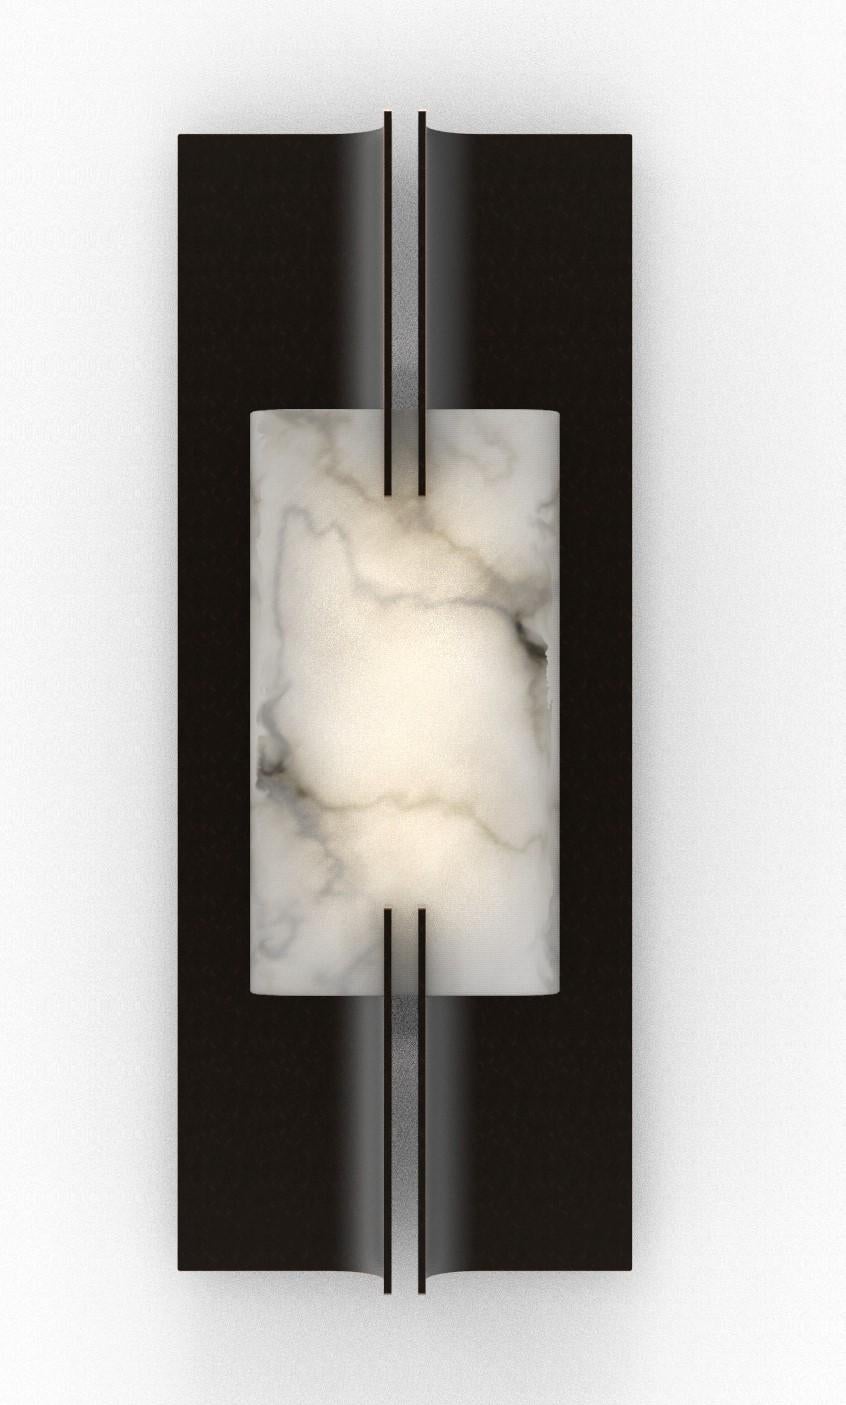 Wall Light with alabaster and matt black metalwork. 

Height: 450mm 
Width: 180mm 
Depth: 70mm
Integrated LED.

Made to order. Variations to dimensions and finishes can be made on request.